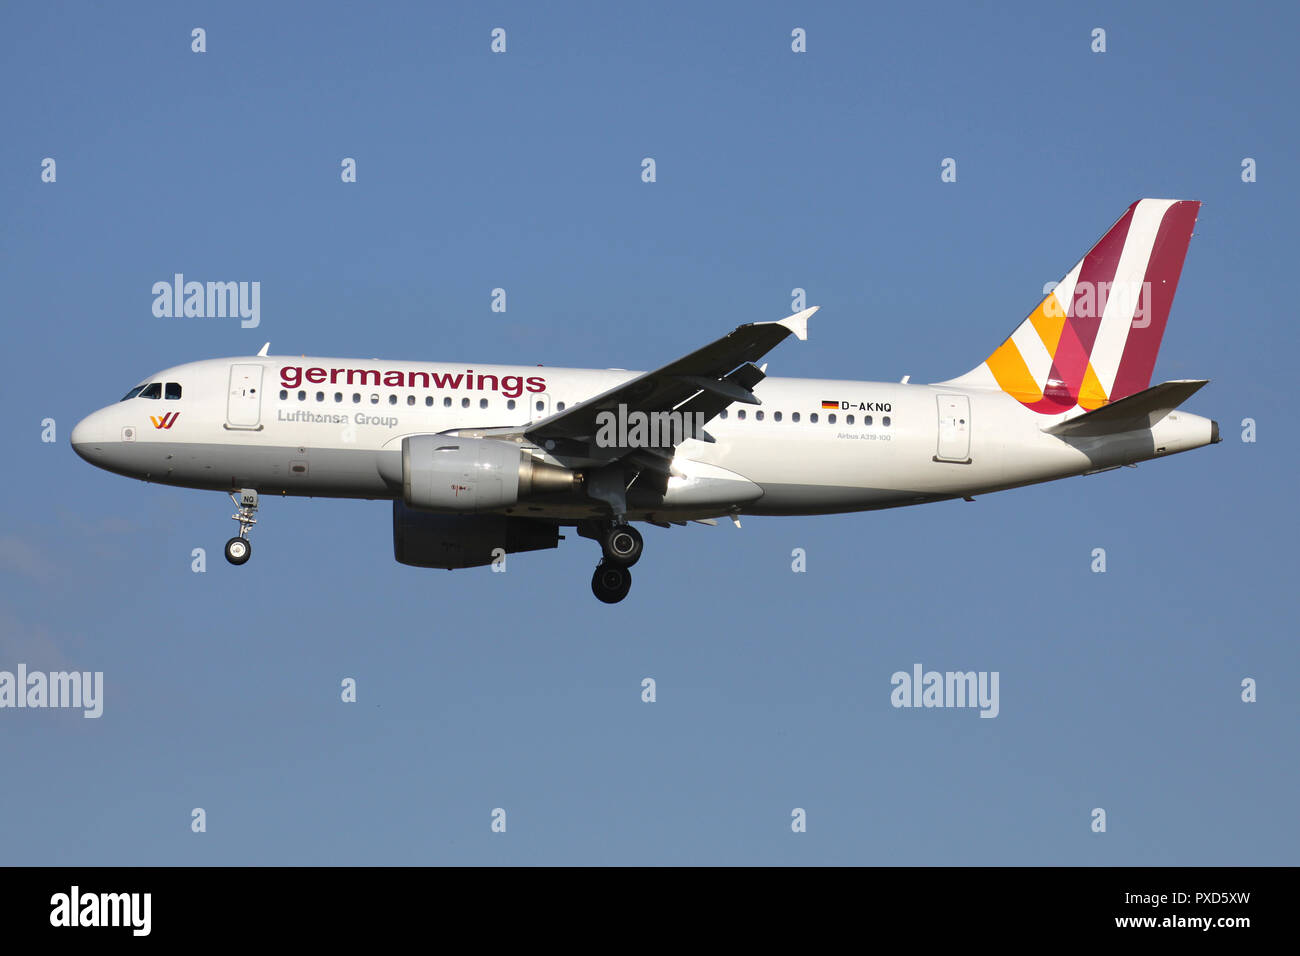 Germanwings Airbus A319-100 with registration D-AKNQ on short final for runway 01 of Brussels Airport. Stock Photo